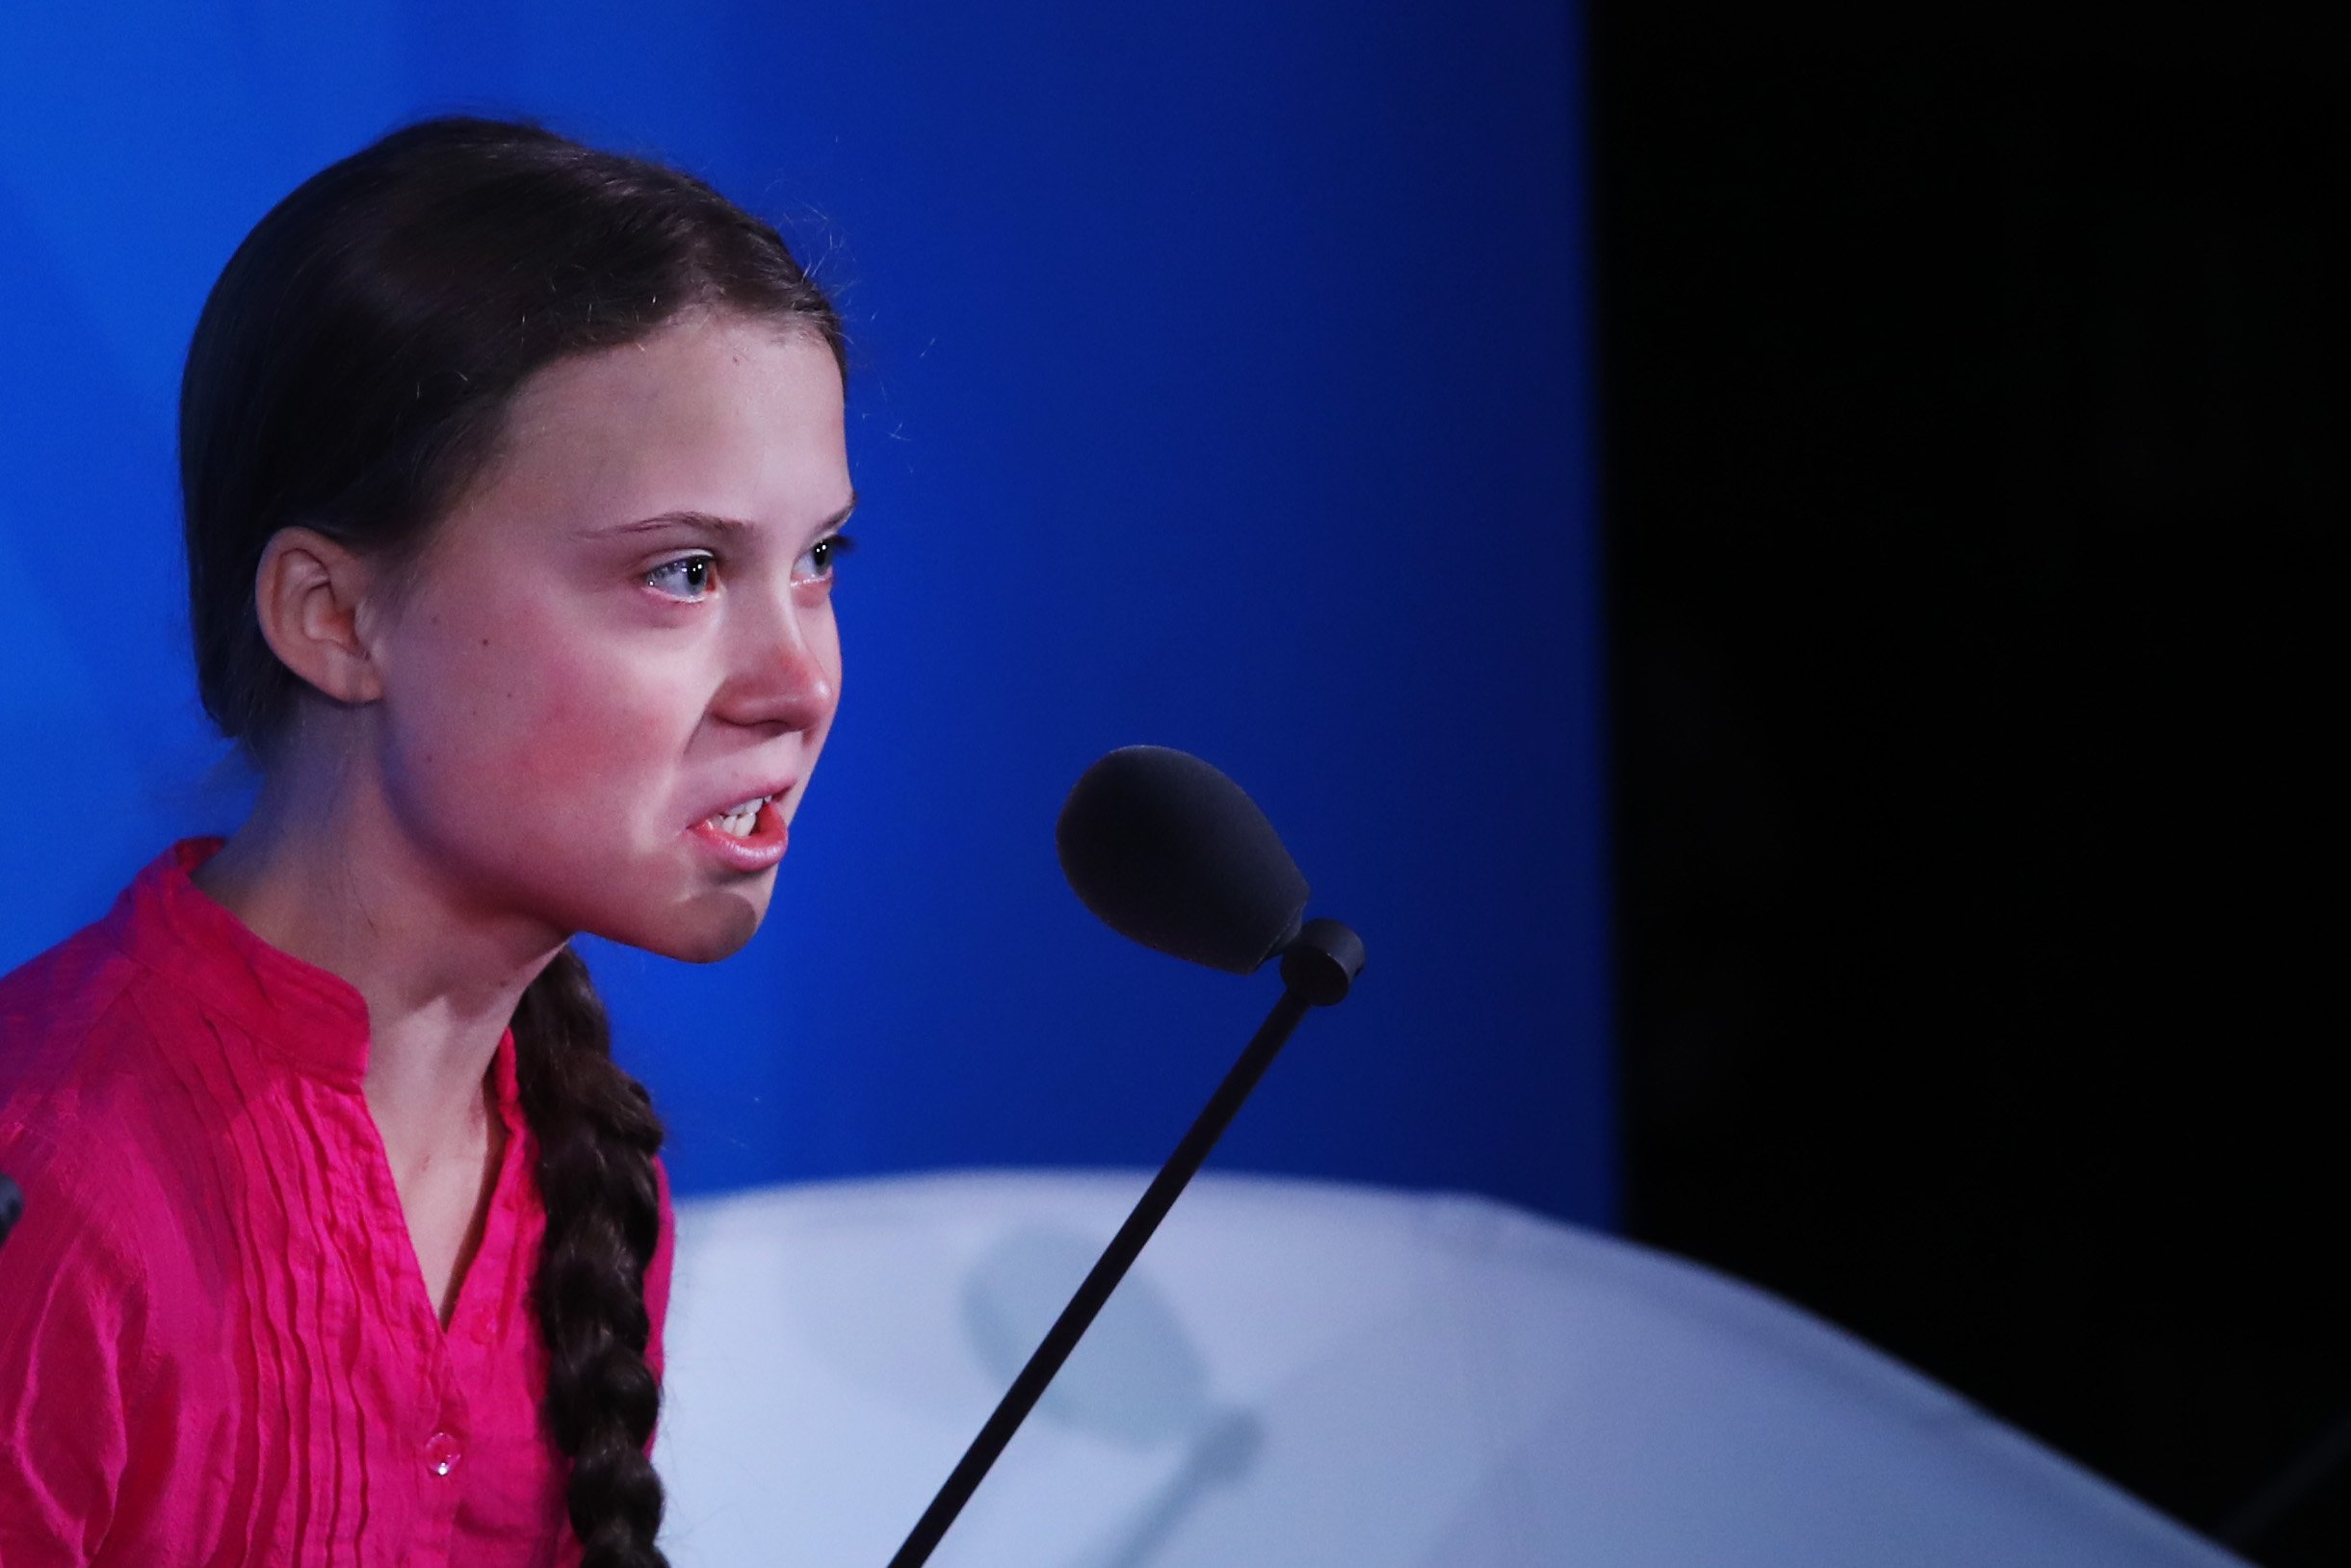 NEW YORK, NEW YORK - SEPTEMBER 23: Greta Thunberg speaks at the United Nations (U.N.) where world leaders are holding a summit on climate change on September 23, 2019 in New York City. While the U.S. will not be participating, China and about 70 other countries are expected to make announcements concerning climate change. The summit at the U.N. comes after a worldwide Youth Climate Strike on Friday, which saw millions of young people around the world demanding action to address the climate crisis. (Photo by Spencer Platt/Getty Images)